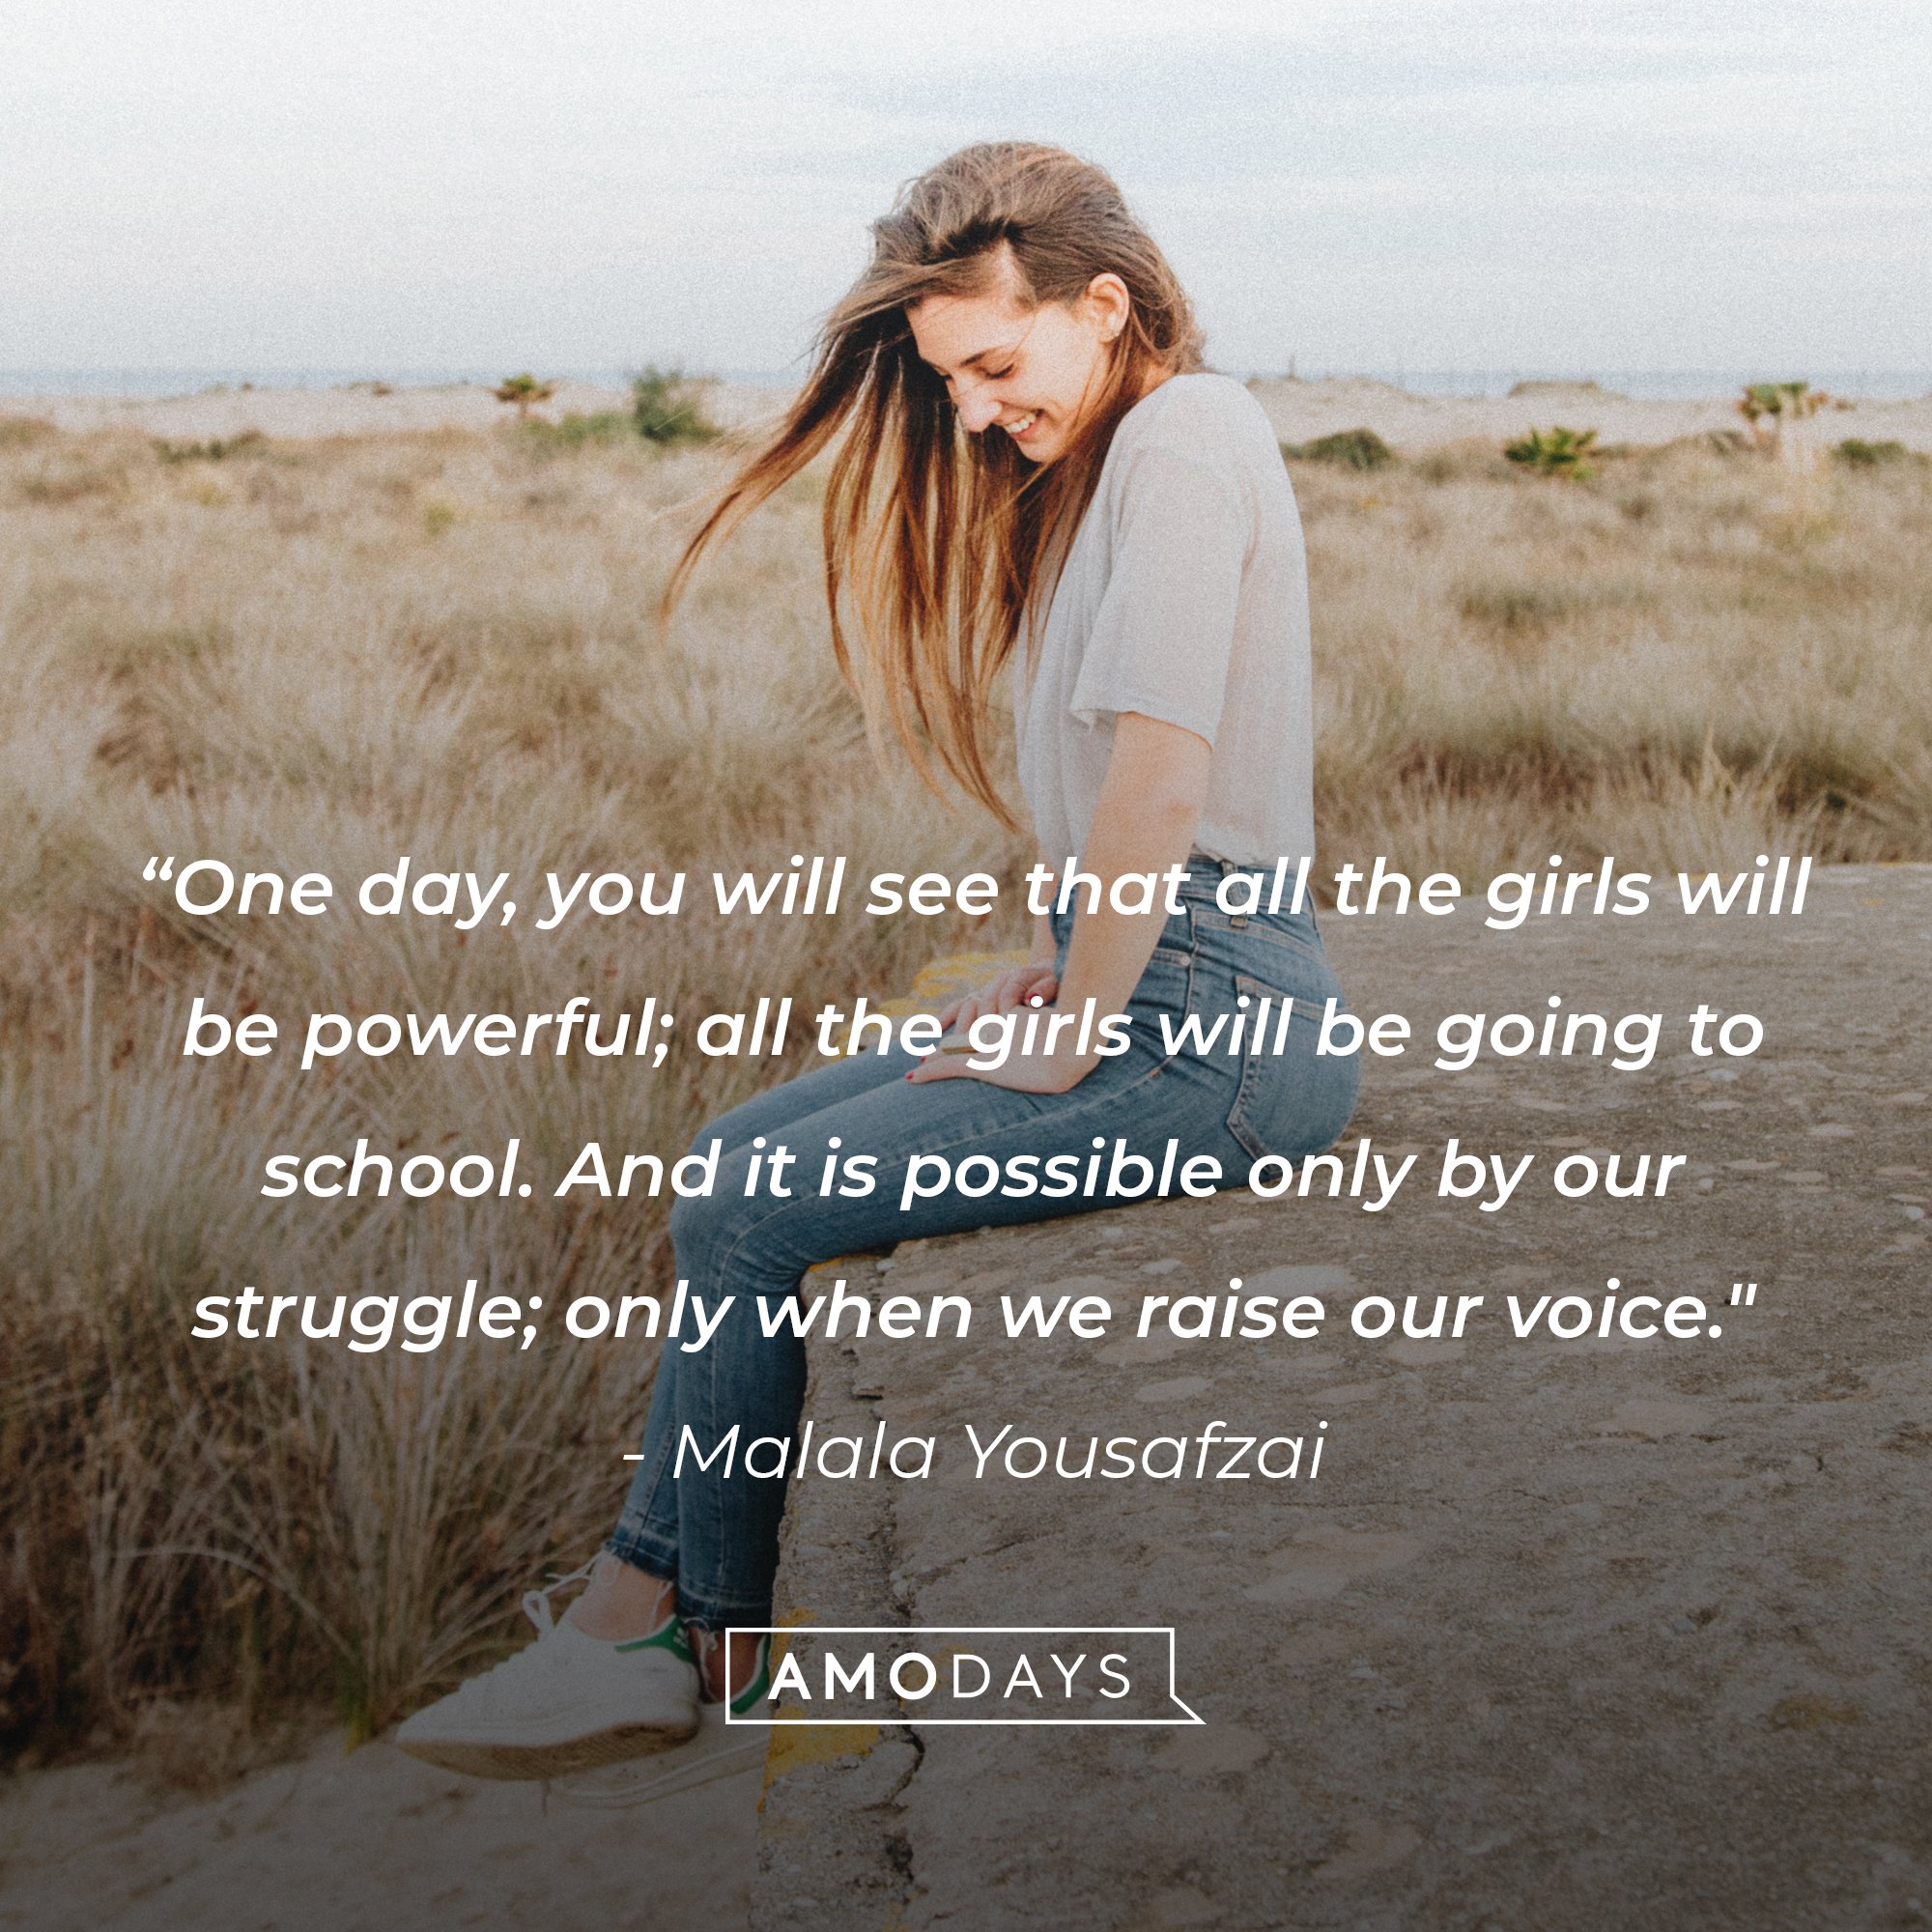  Malala Yousafzai’s quote: “One day, you will see that all the girls will be powerful; all the girls will be going to school. And it is possible only by our struggle; only when we raise our voice." | Image: AmoDays